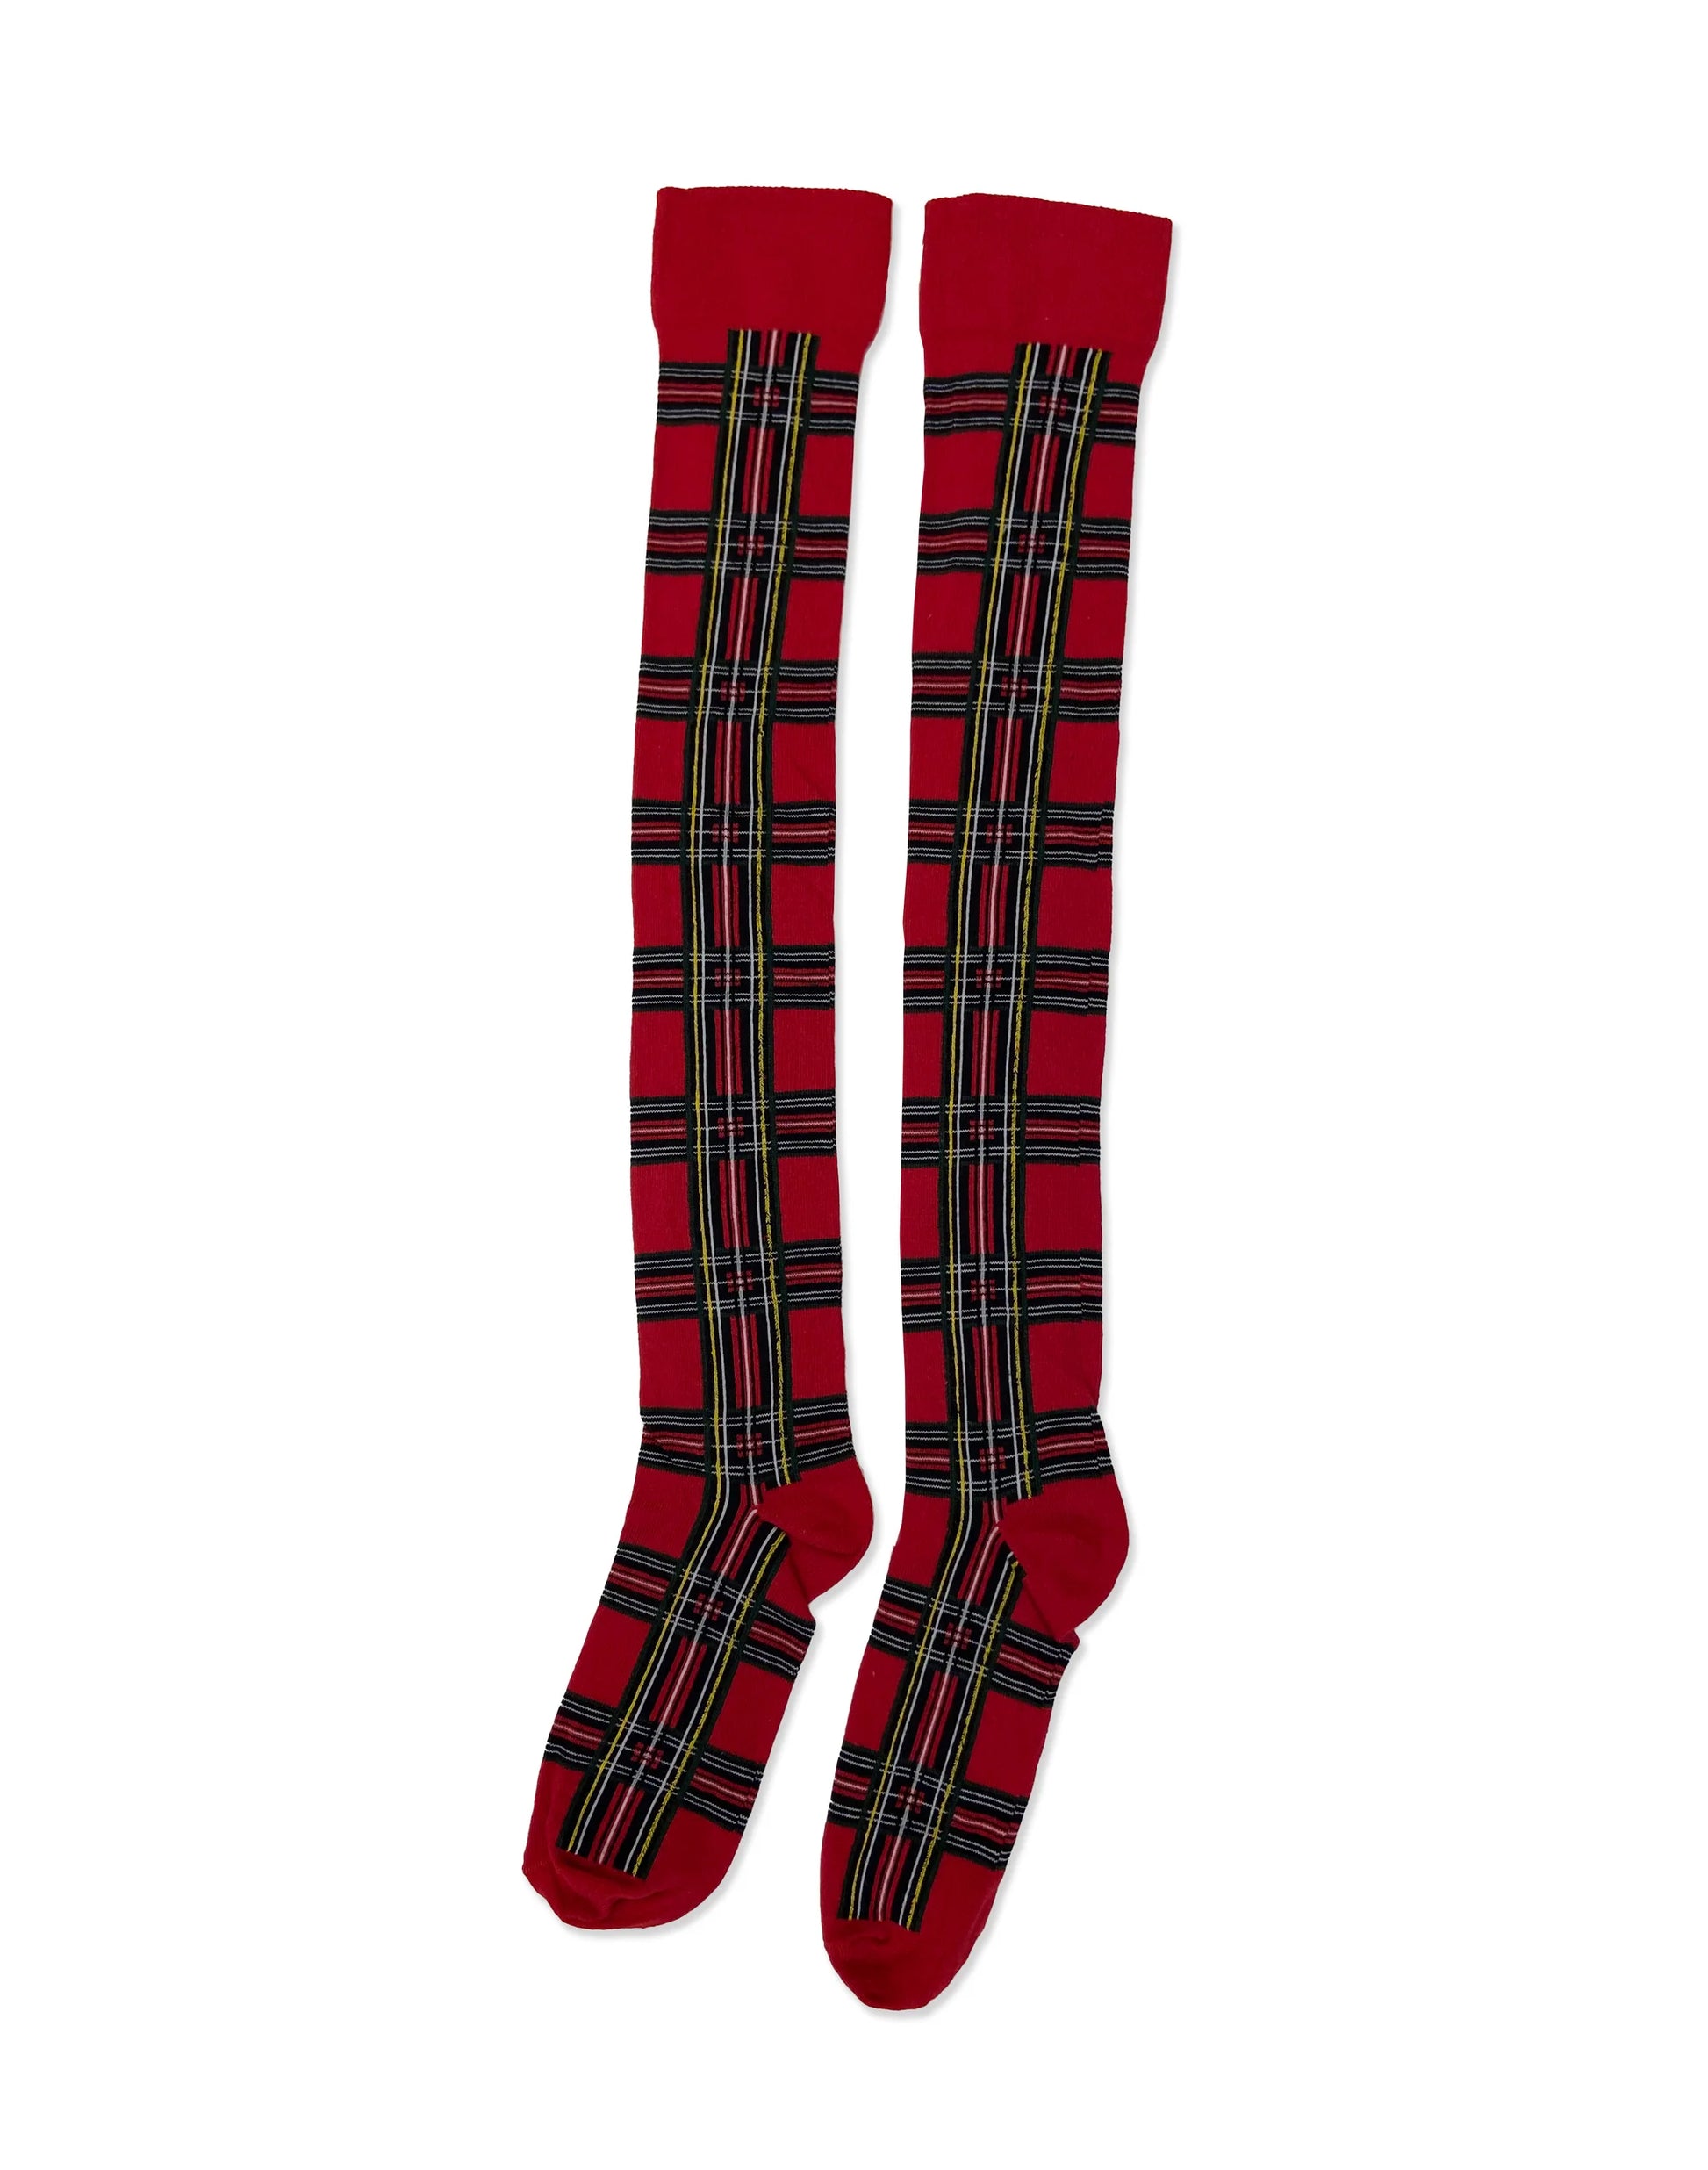 Pamela Mann Tartan Over-Knee Socks - Red cotton mix over the knee long socks with a plaid check pattern in black, yellow and green.